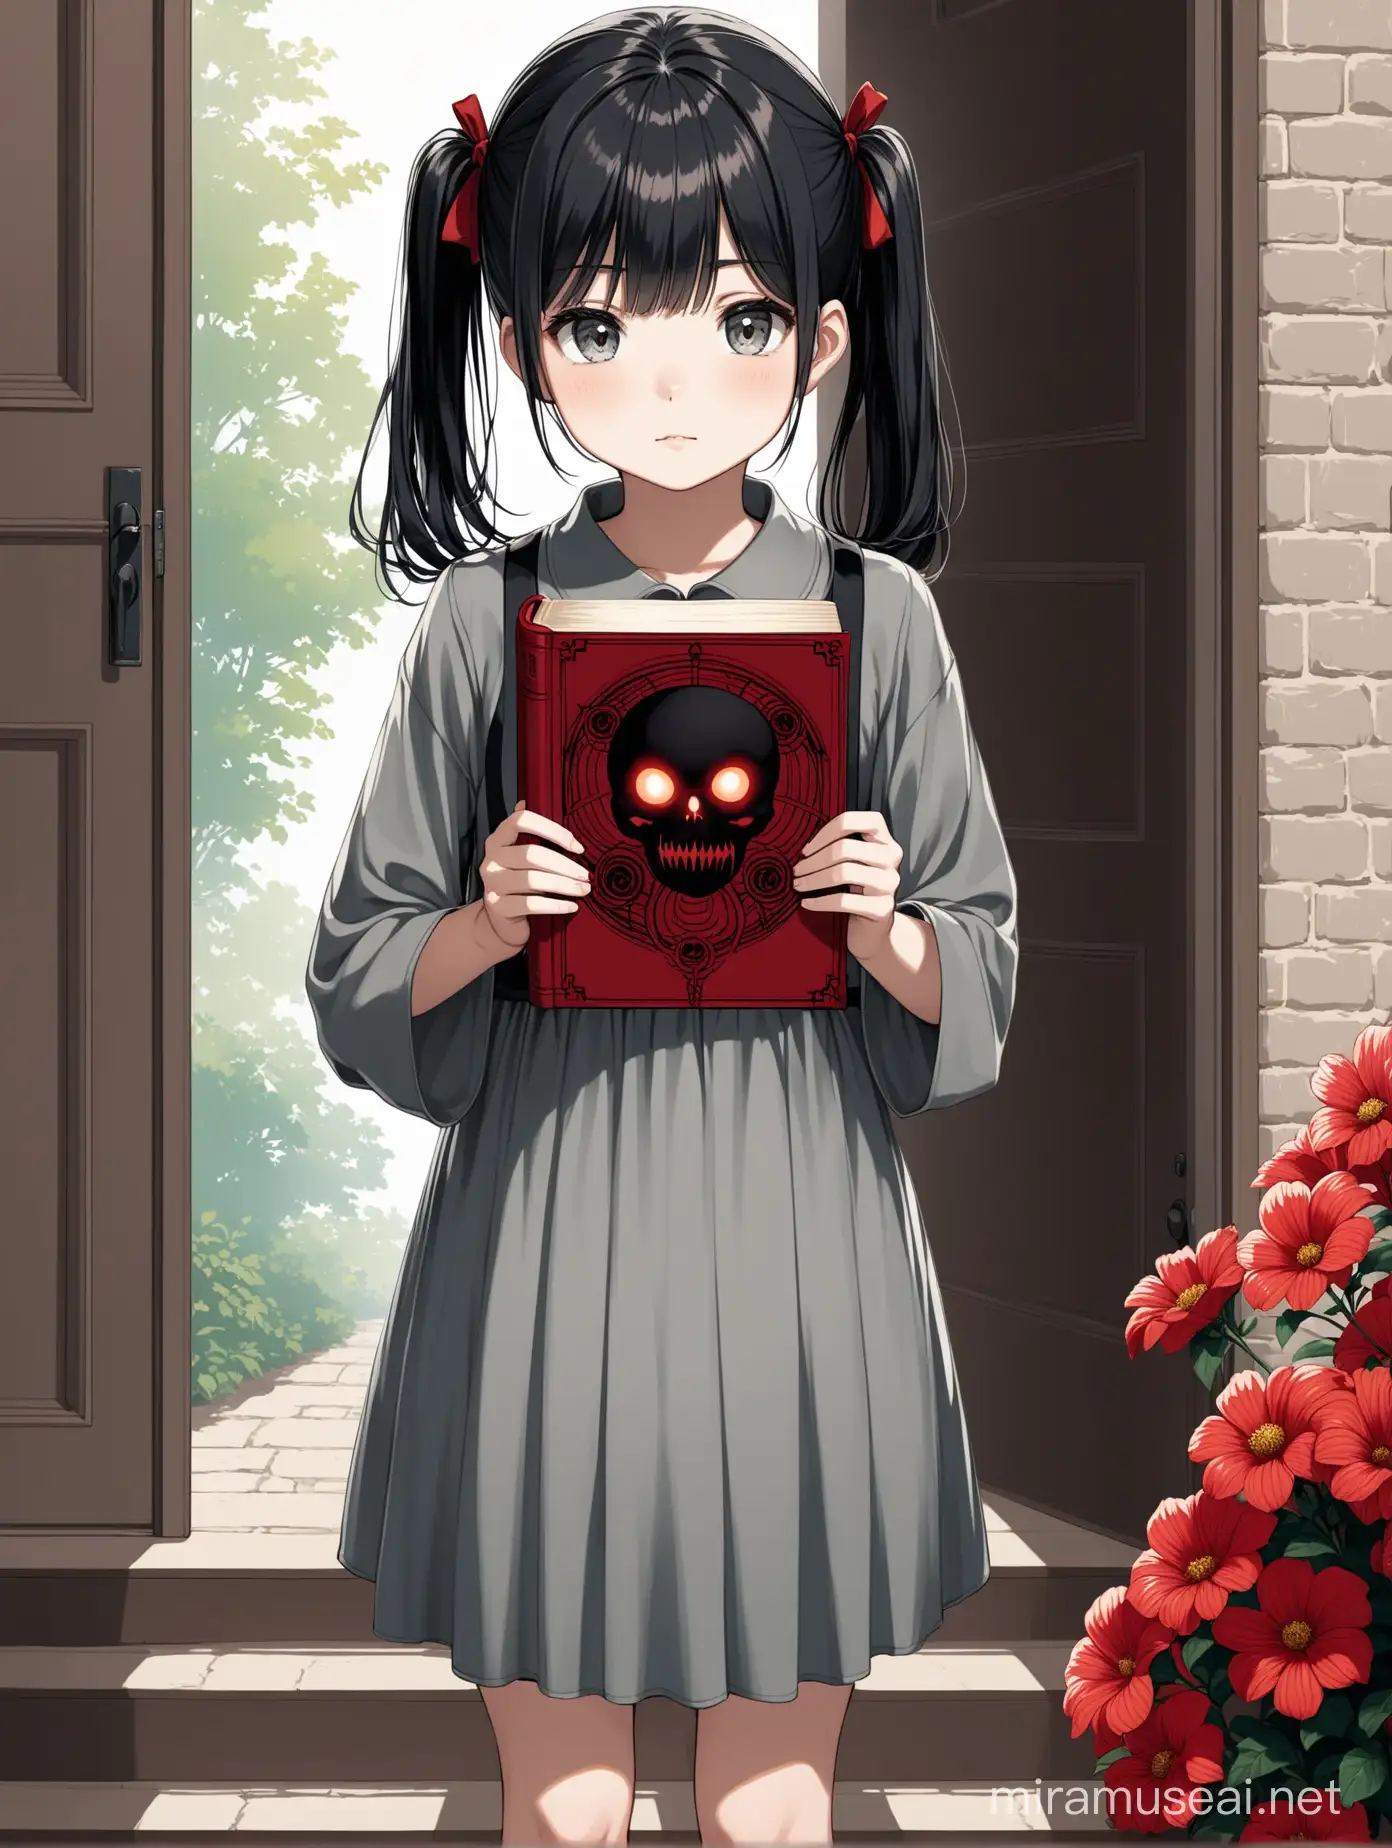 12 year old girl on doorsteps, looking at you, black hair with two ponytails, simple gray dress, gray eyes, thin, necronomicon book in hands, red flower hairpin